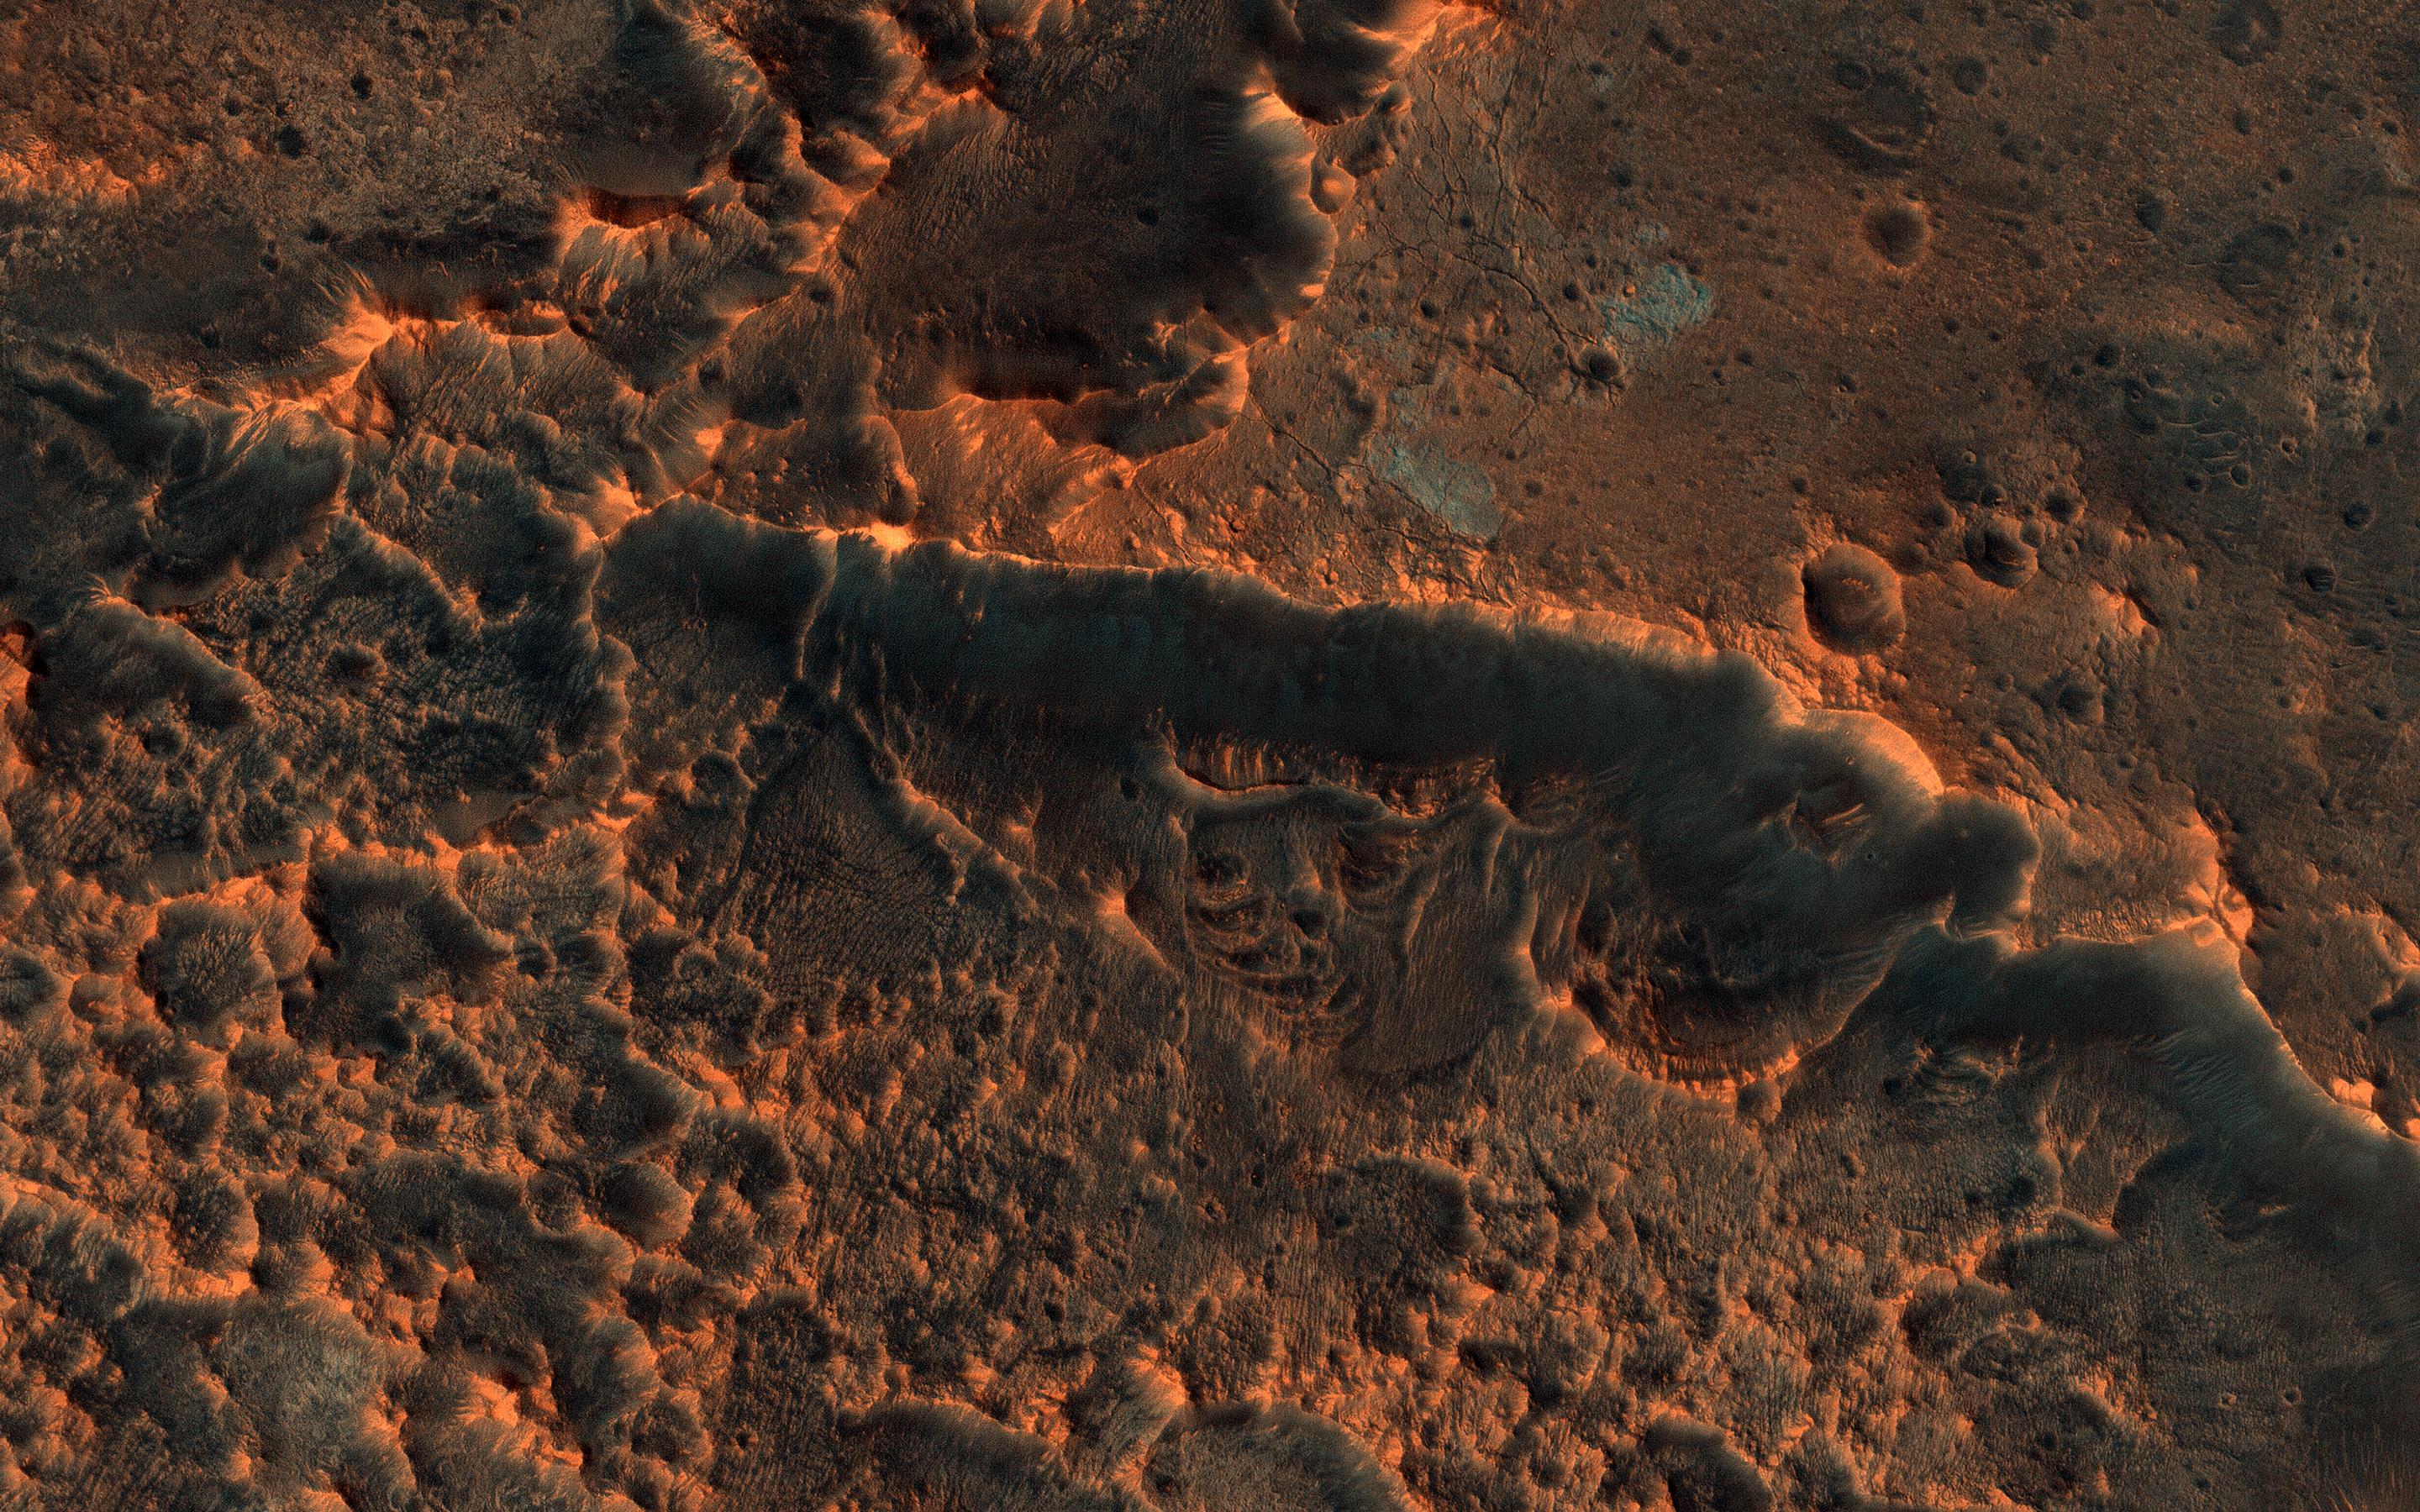 Nasa Pictures Of Mars